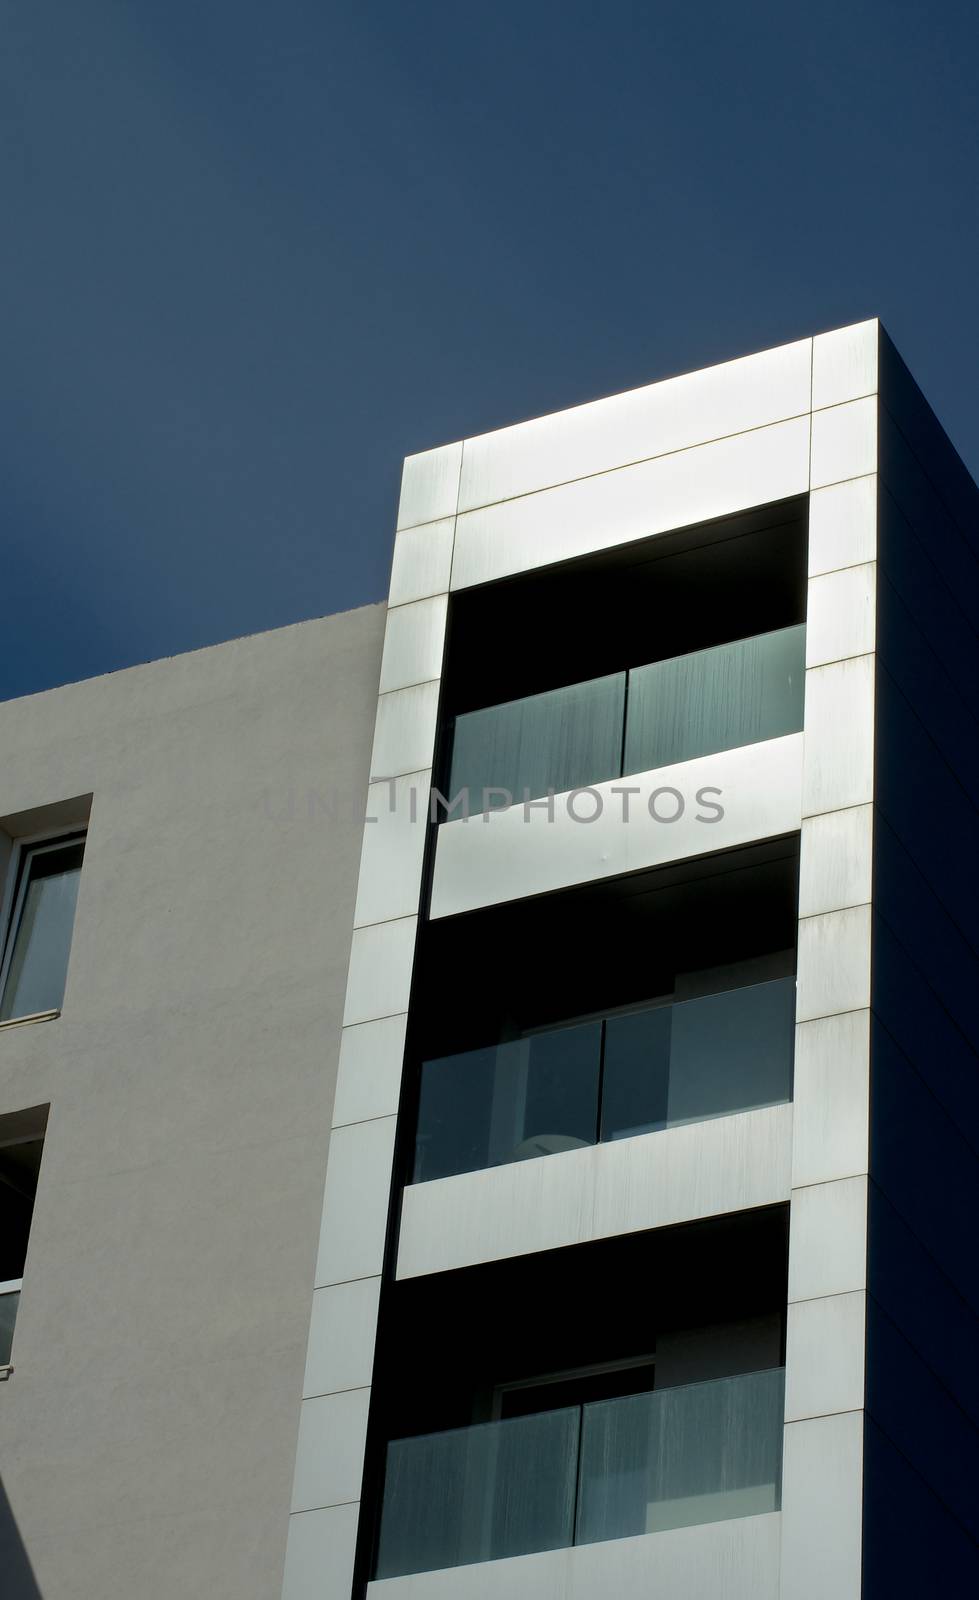 Part of Modern Building with Exterior Elements of Stainless Steel on Blue Sky background Outdoors